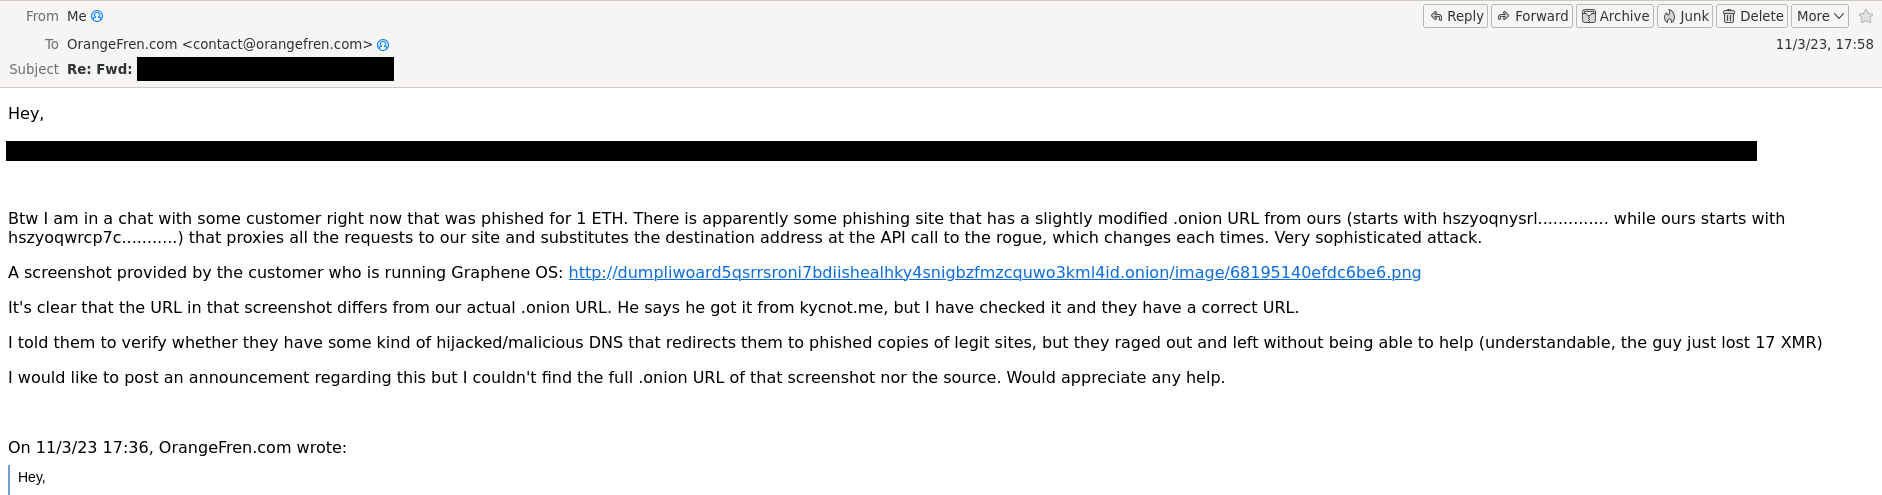 A screnshot of the email from eXch to OrangeFren in regards to the phished customer